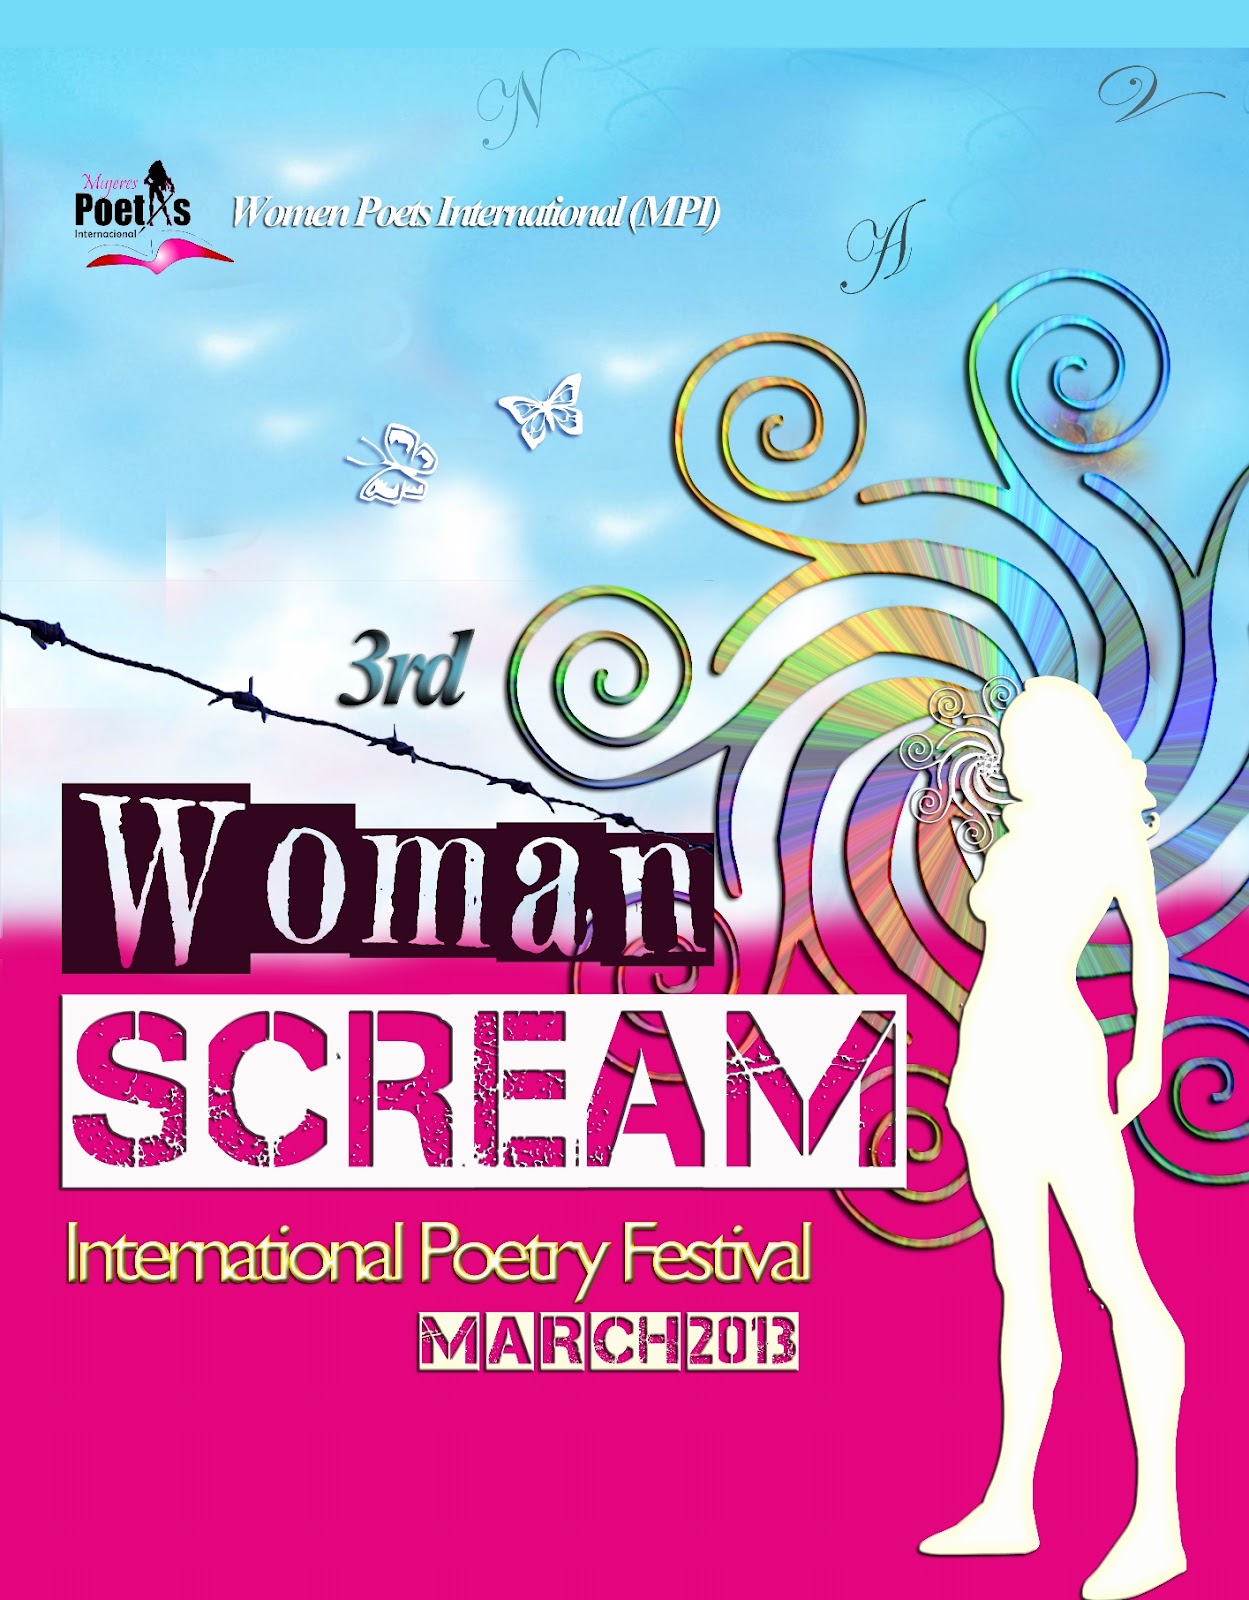 Call for Participants: The 2012 'Woman’ Scream' International Poetry Festival